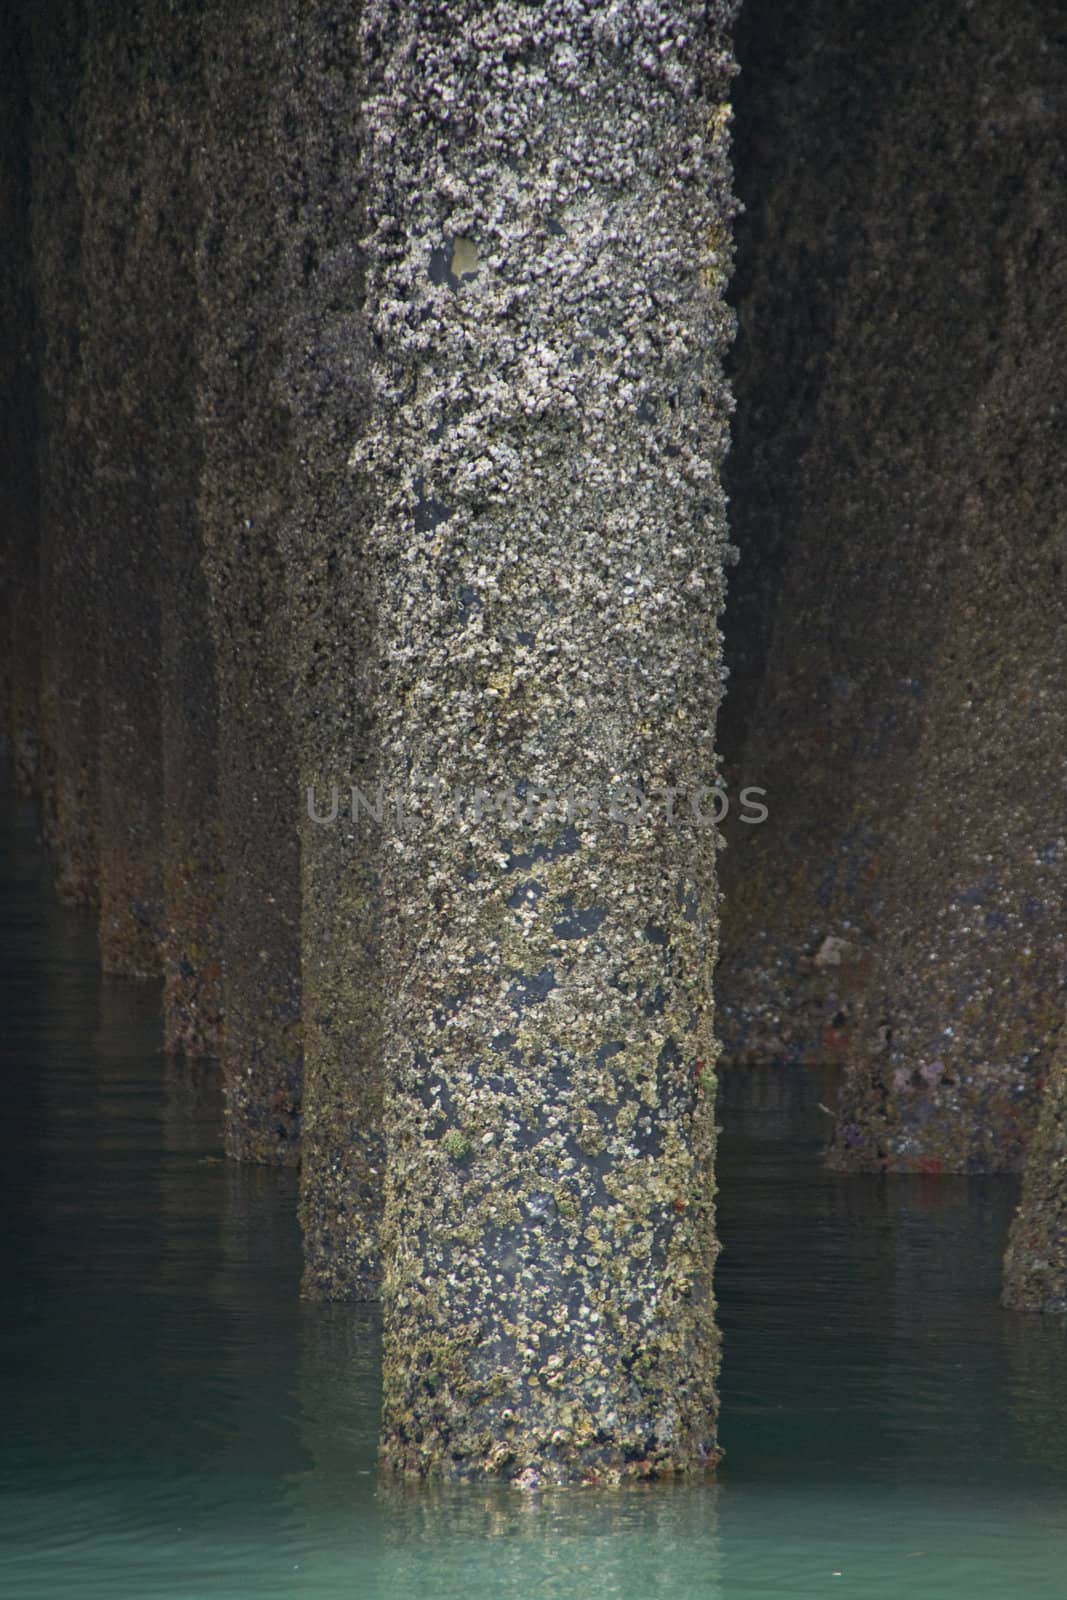 A collection of pillars work together to hold a dock above water in the ocean at the port of Darwin in Australia.